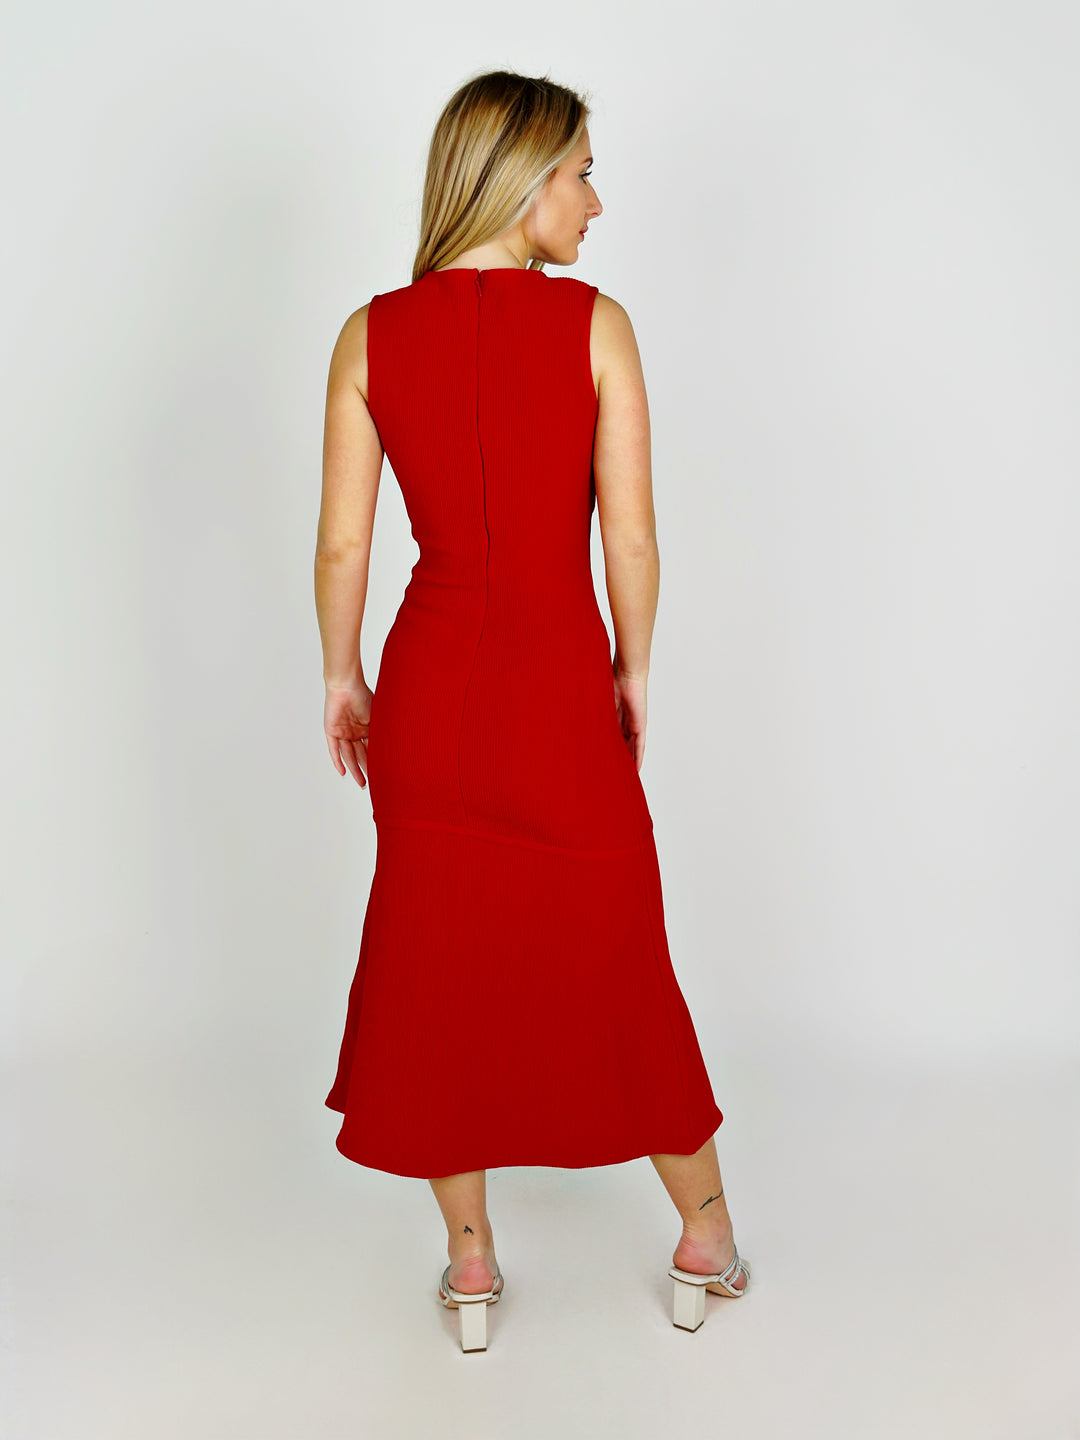 Red Solid Knit Dress